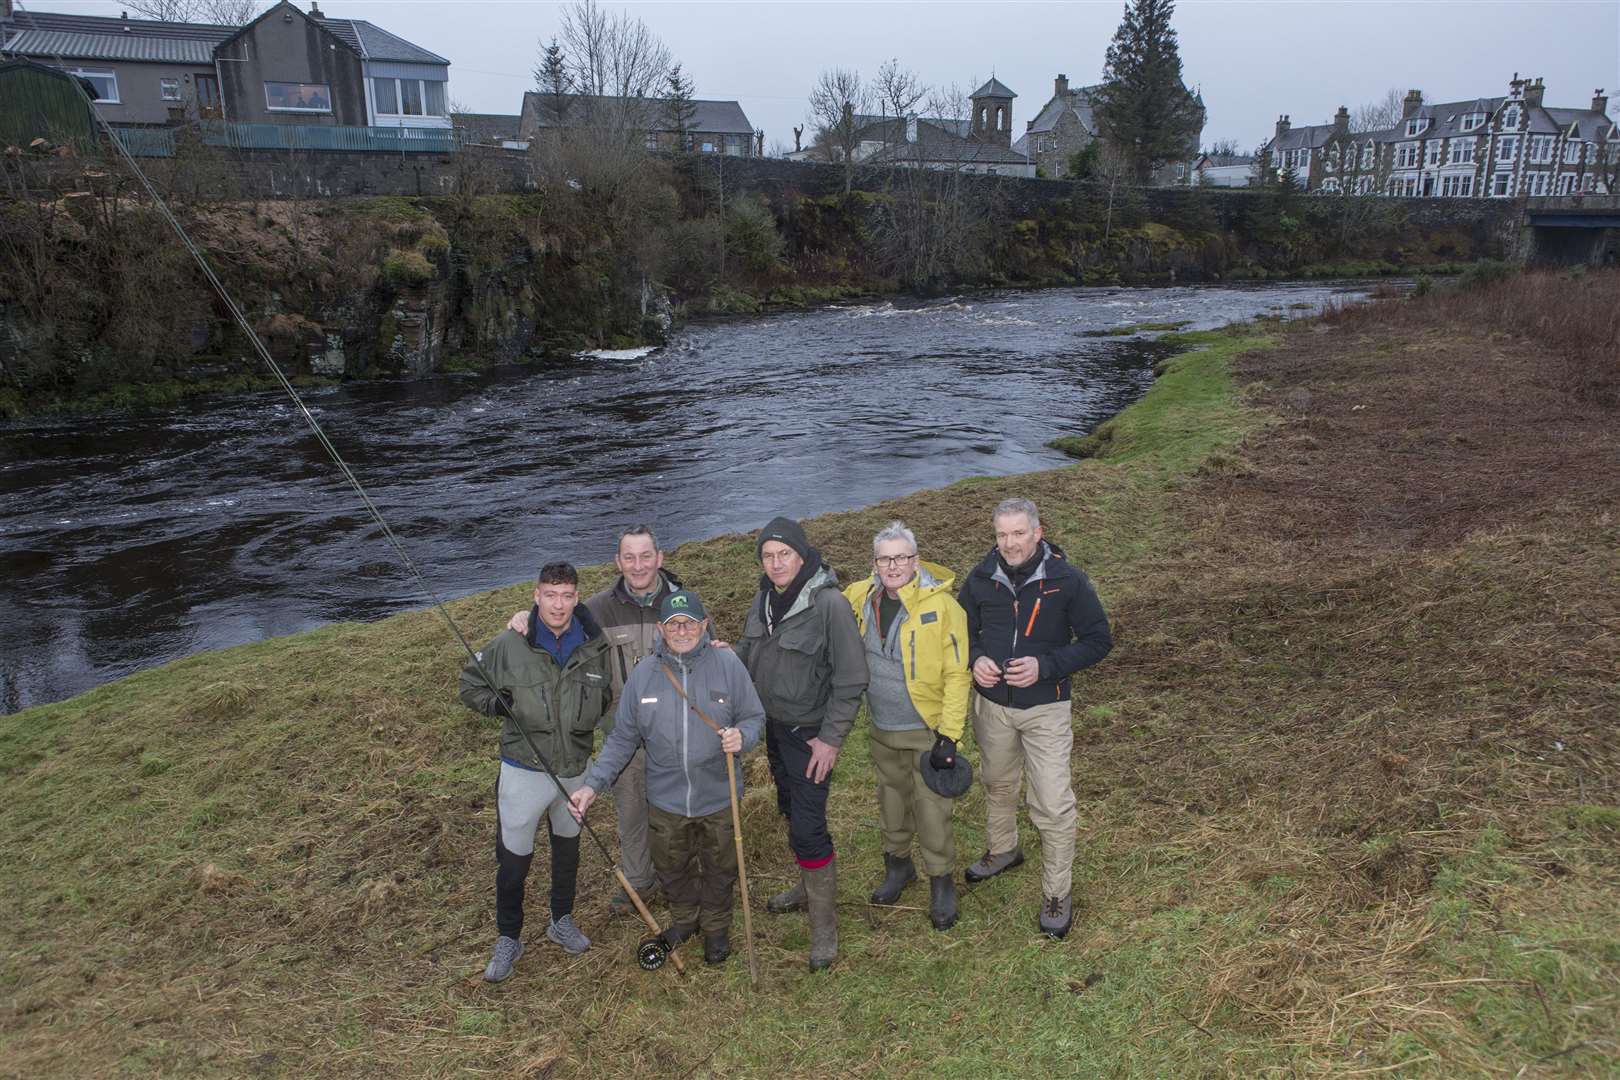 Glasgow doctor Mike Leach (centre), who has been fishing the River Thurso for the past 41 years, with some of the group of anglers from the Glasgow area whom he has introduced to the river. They make three journeys north each fishing season and this year the honour of toasting the river and casting the first fly of the season went to two members of the group. Freddie Sutherland (foreground), an 81-year-old landscape gardener, cast the first fly, while Peter Duncan (second left) toasted the river. Picture: Robert MacDonald / Northern Studios